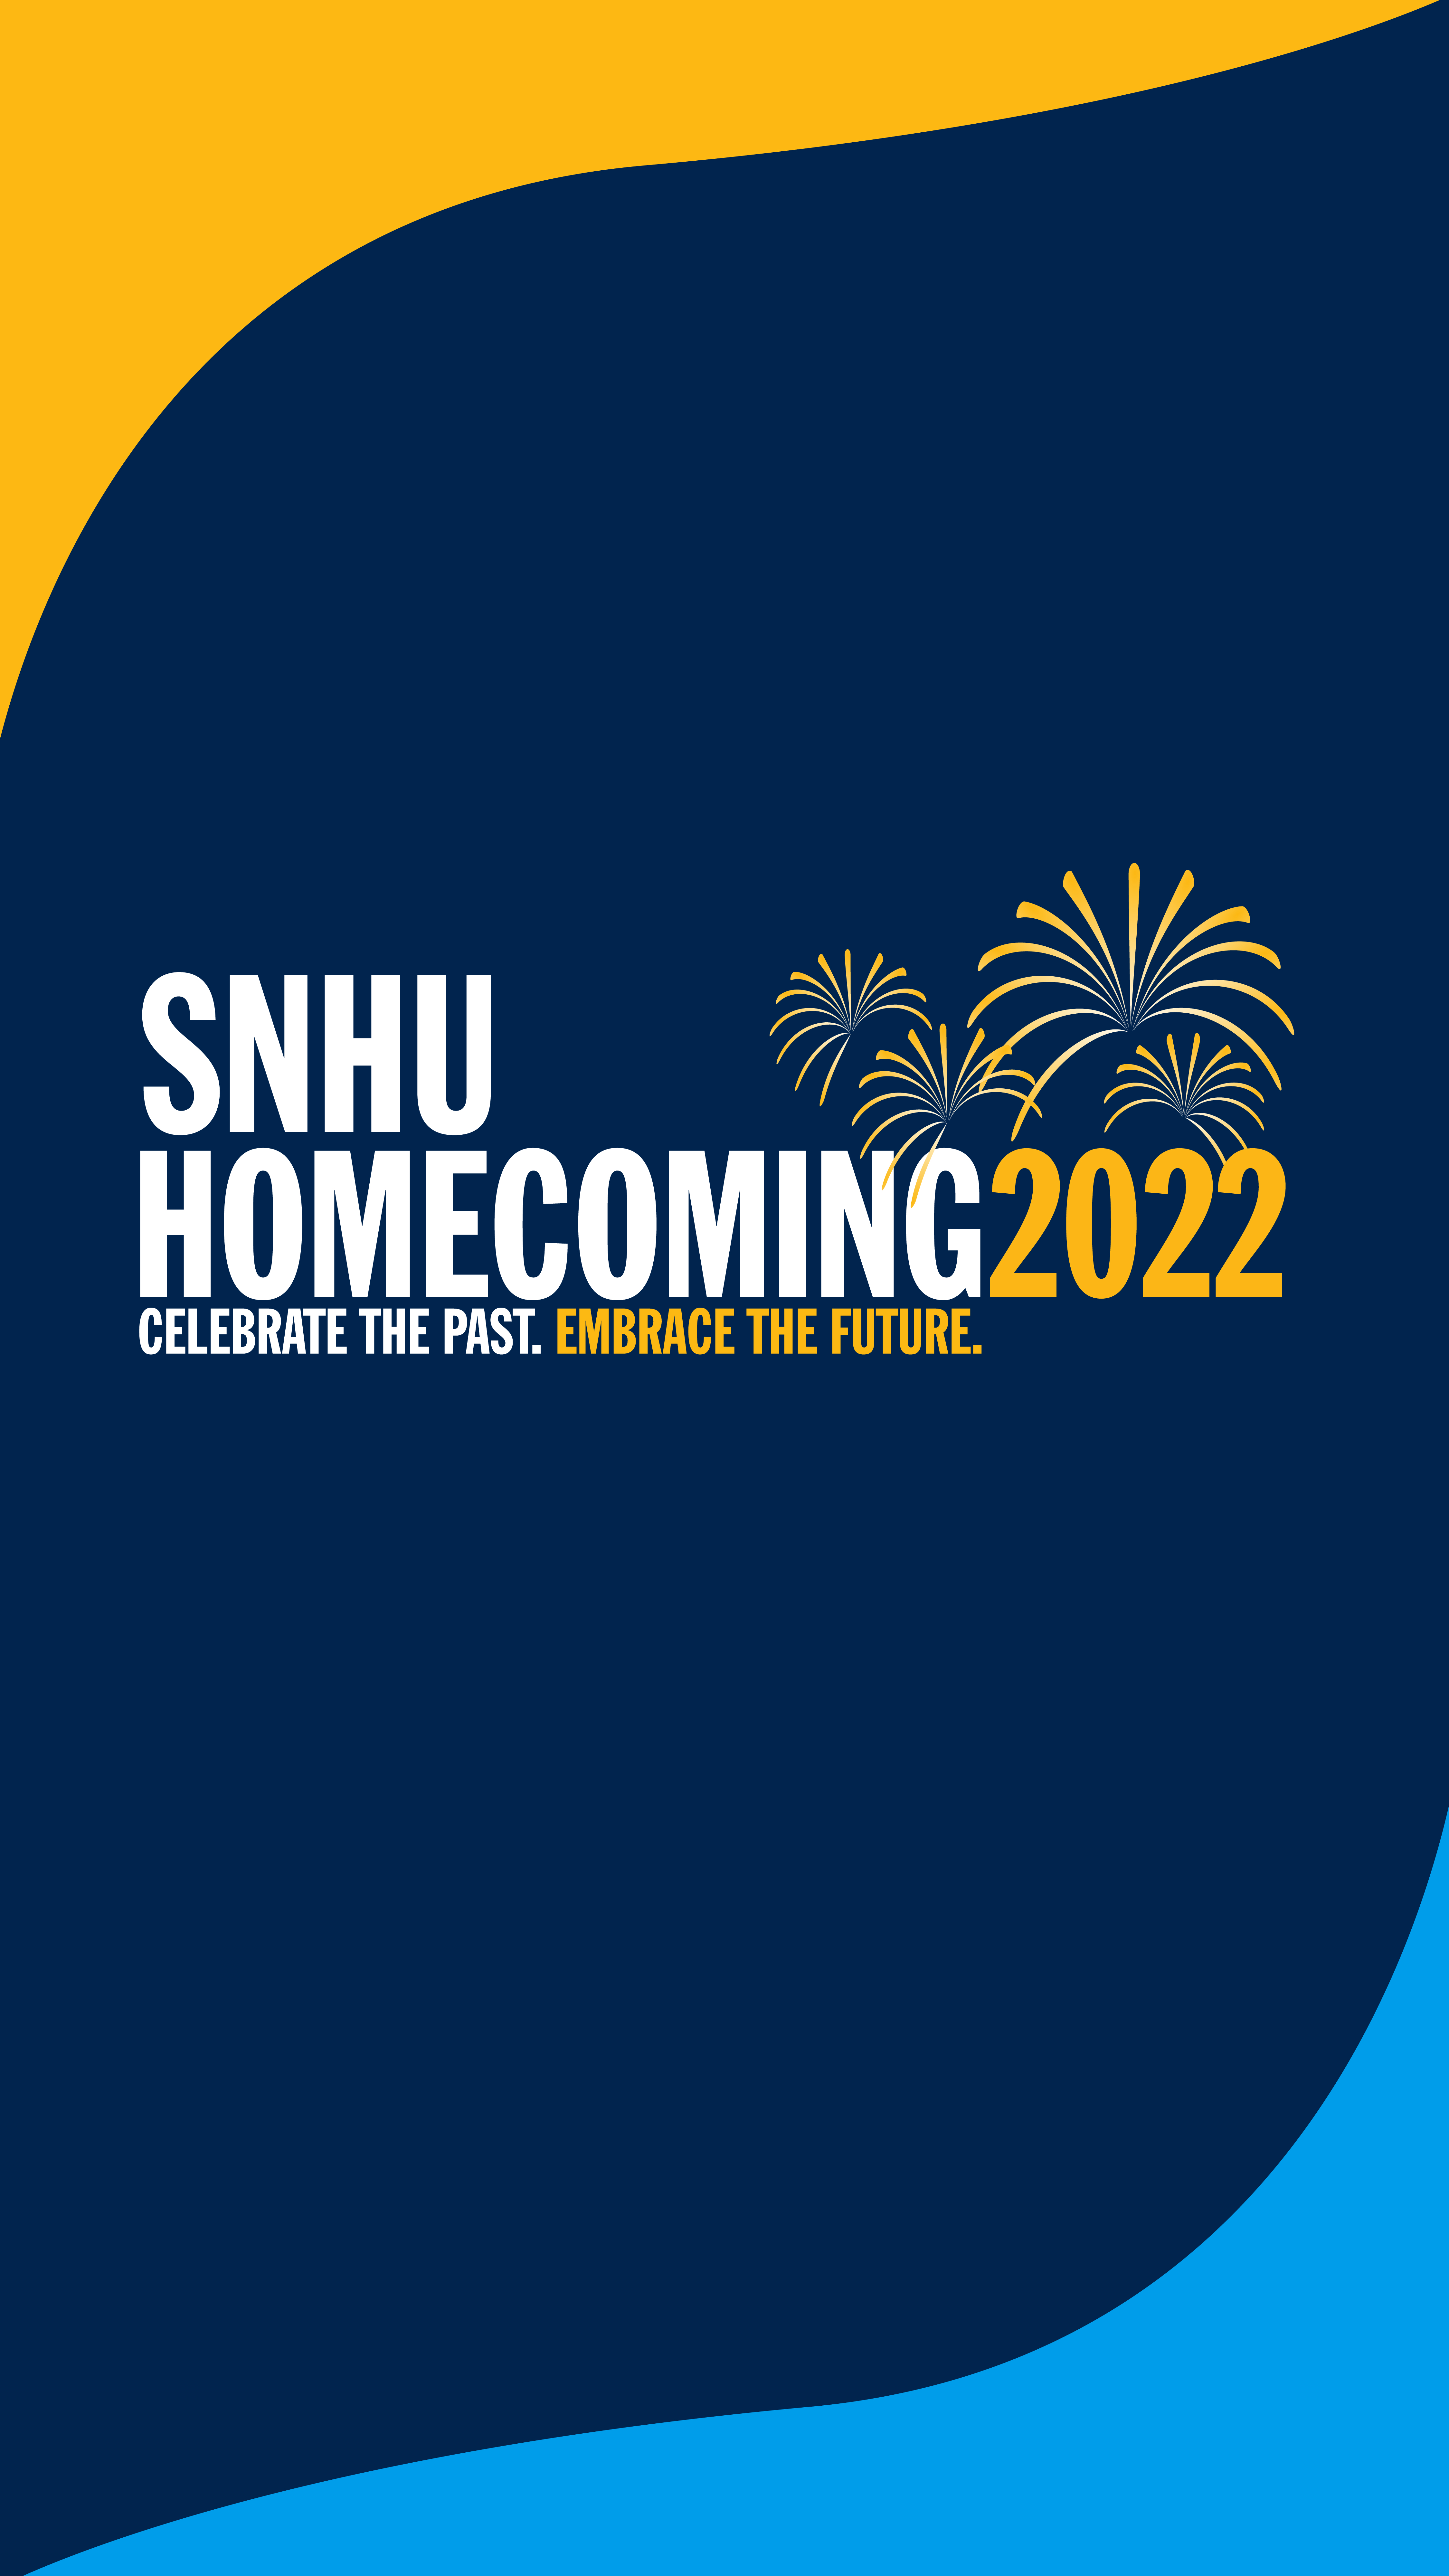 SNHU Homecoming 2022 | Celebrate the past. Embrace the future.